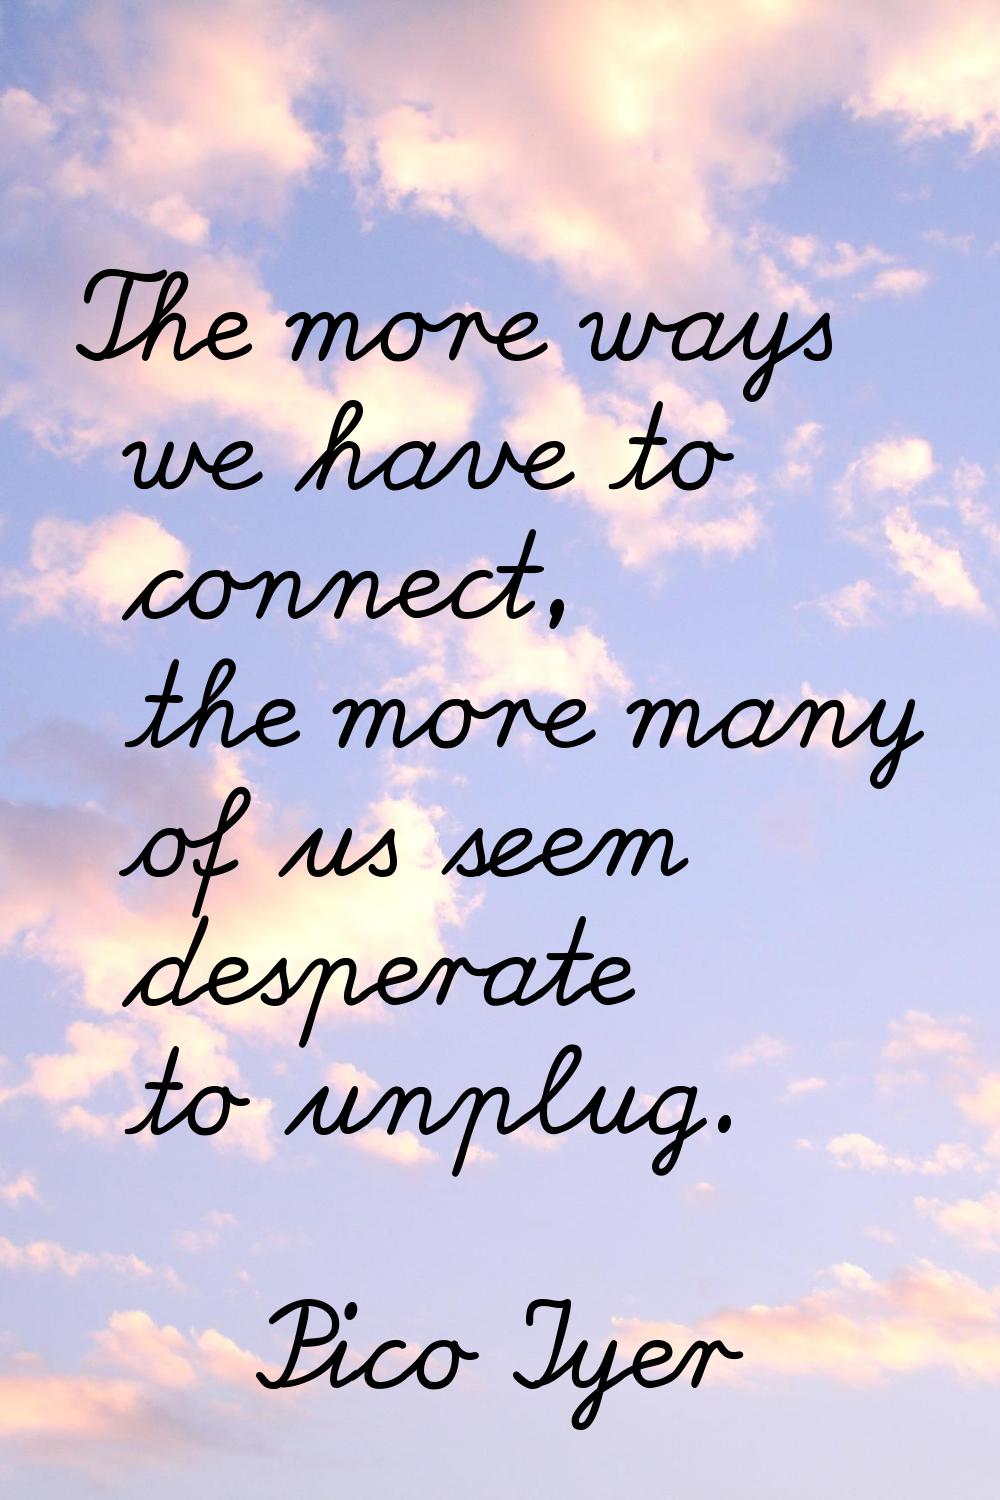 The more ways we have to connect, the more many of us seem desperate to unplug.